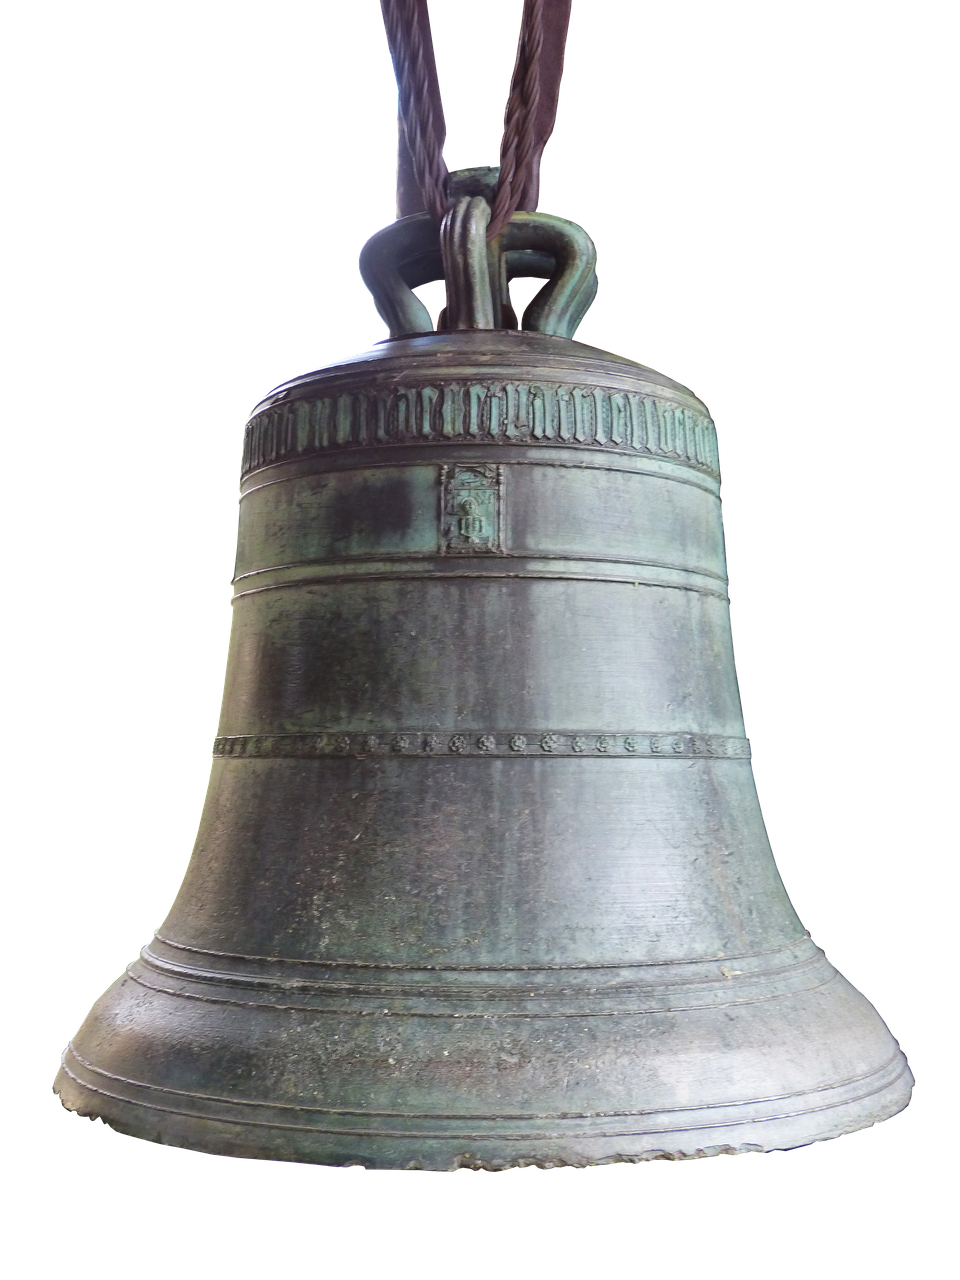 bell bronze old free photo